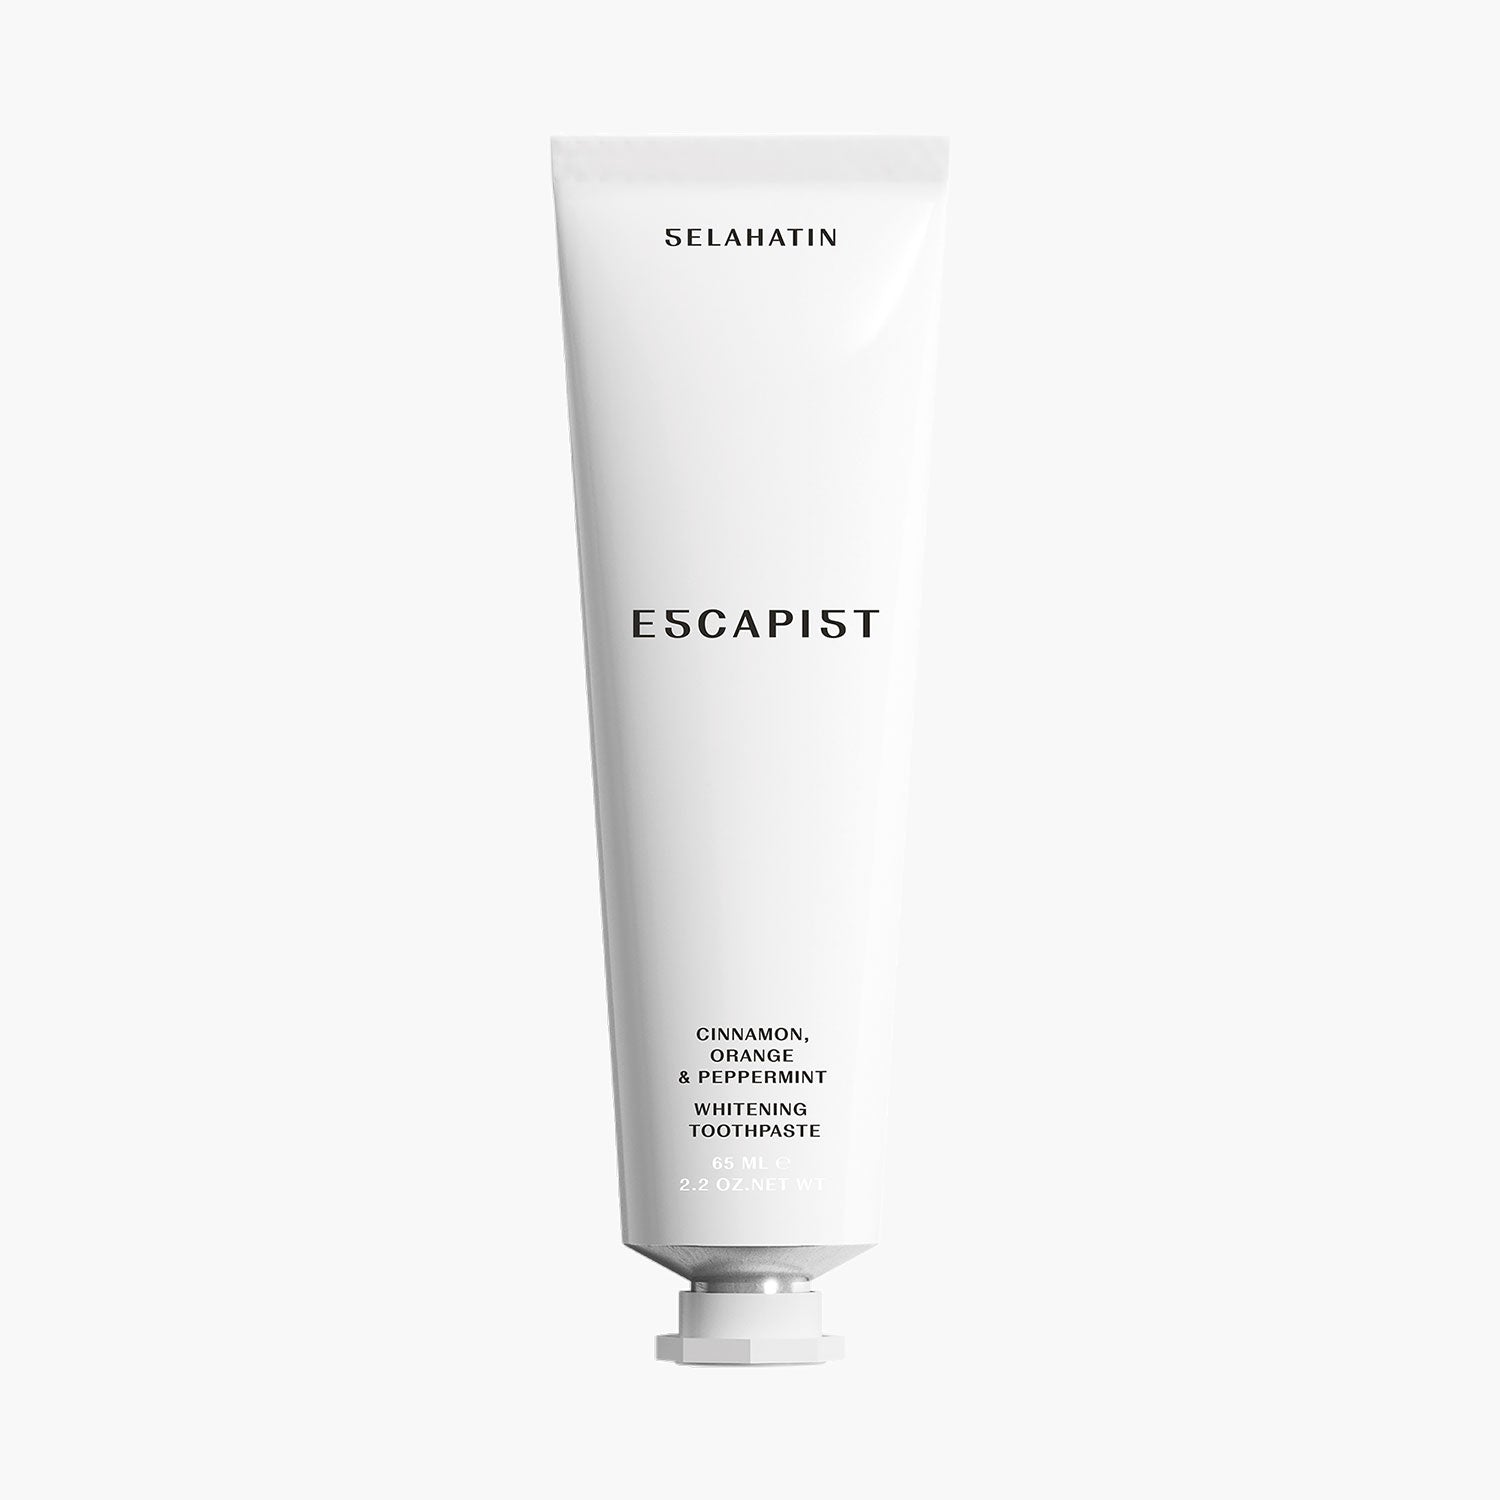 luxury beauty whitening toothpaste Escapist by Selahatin at Secret Location Concept Store